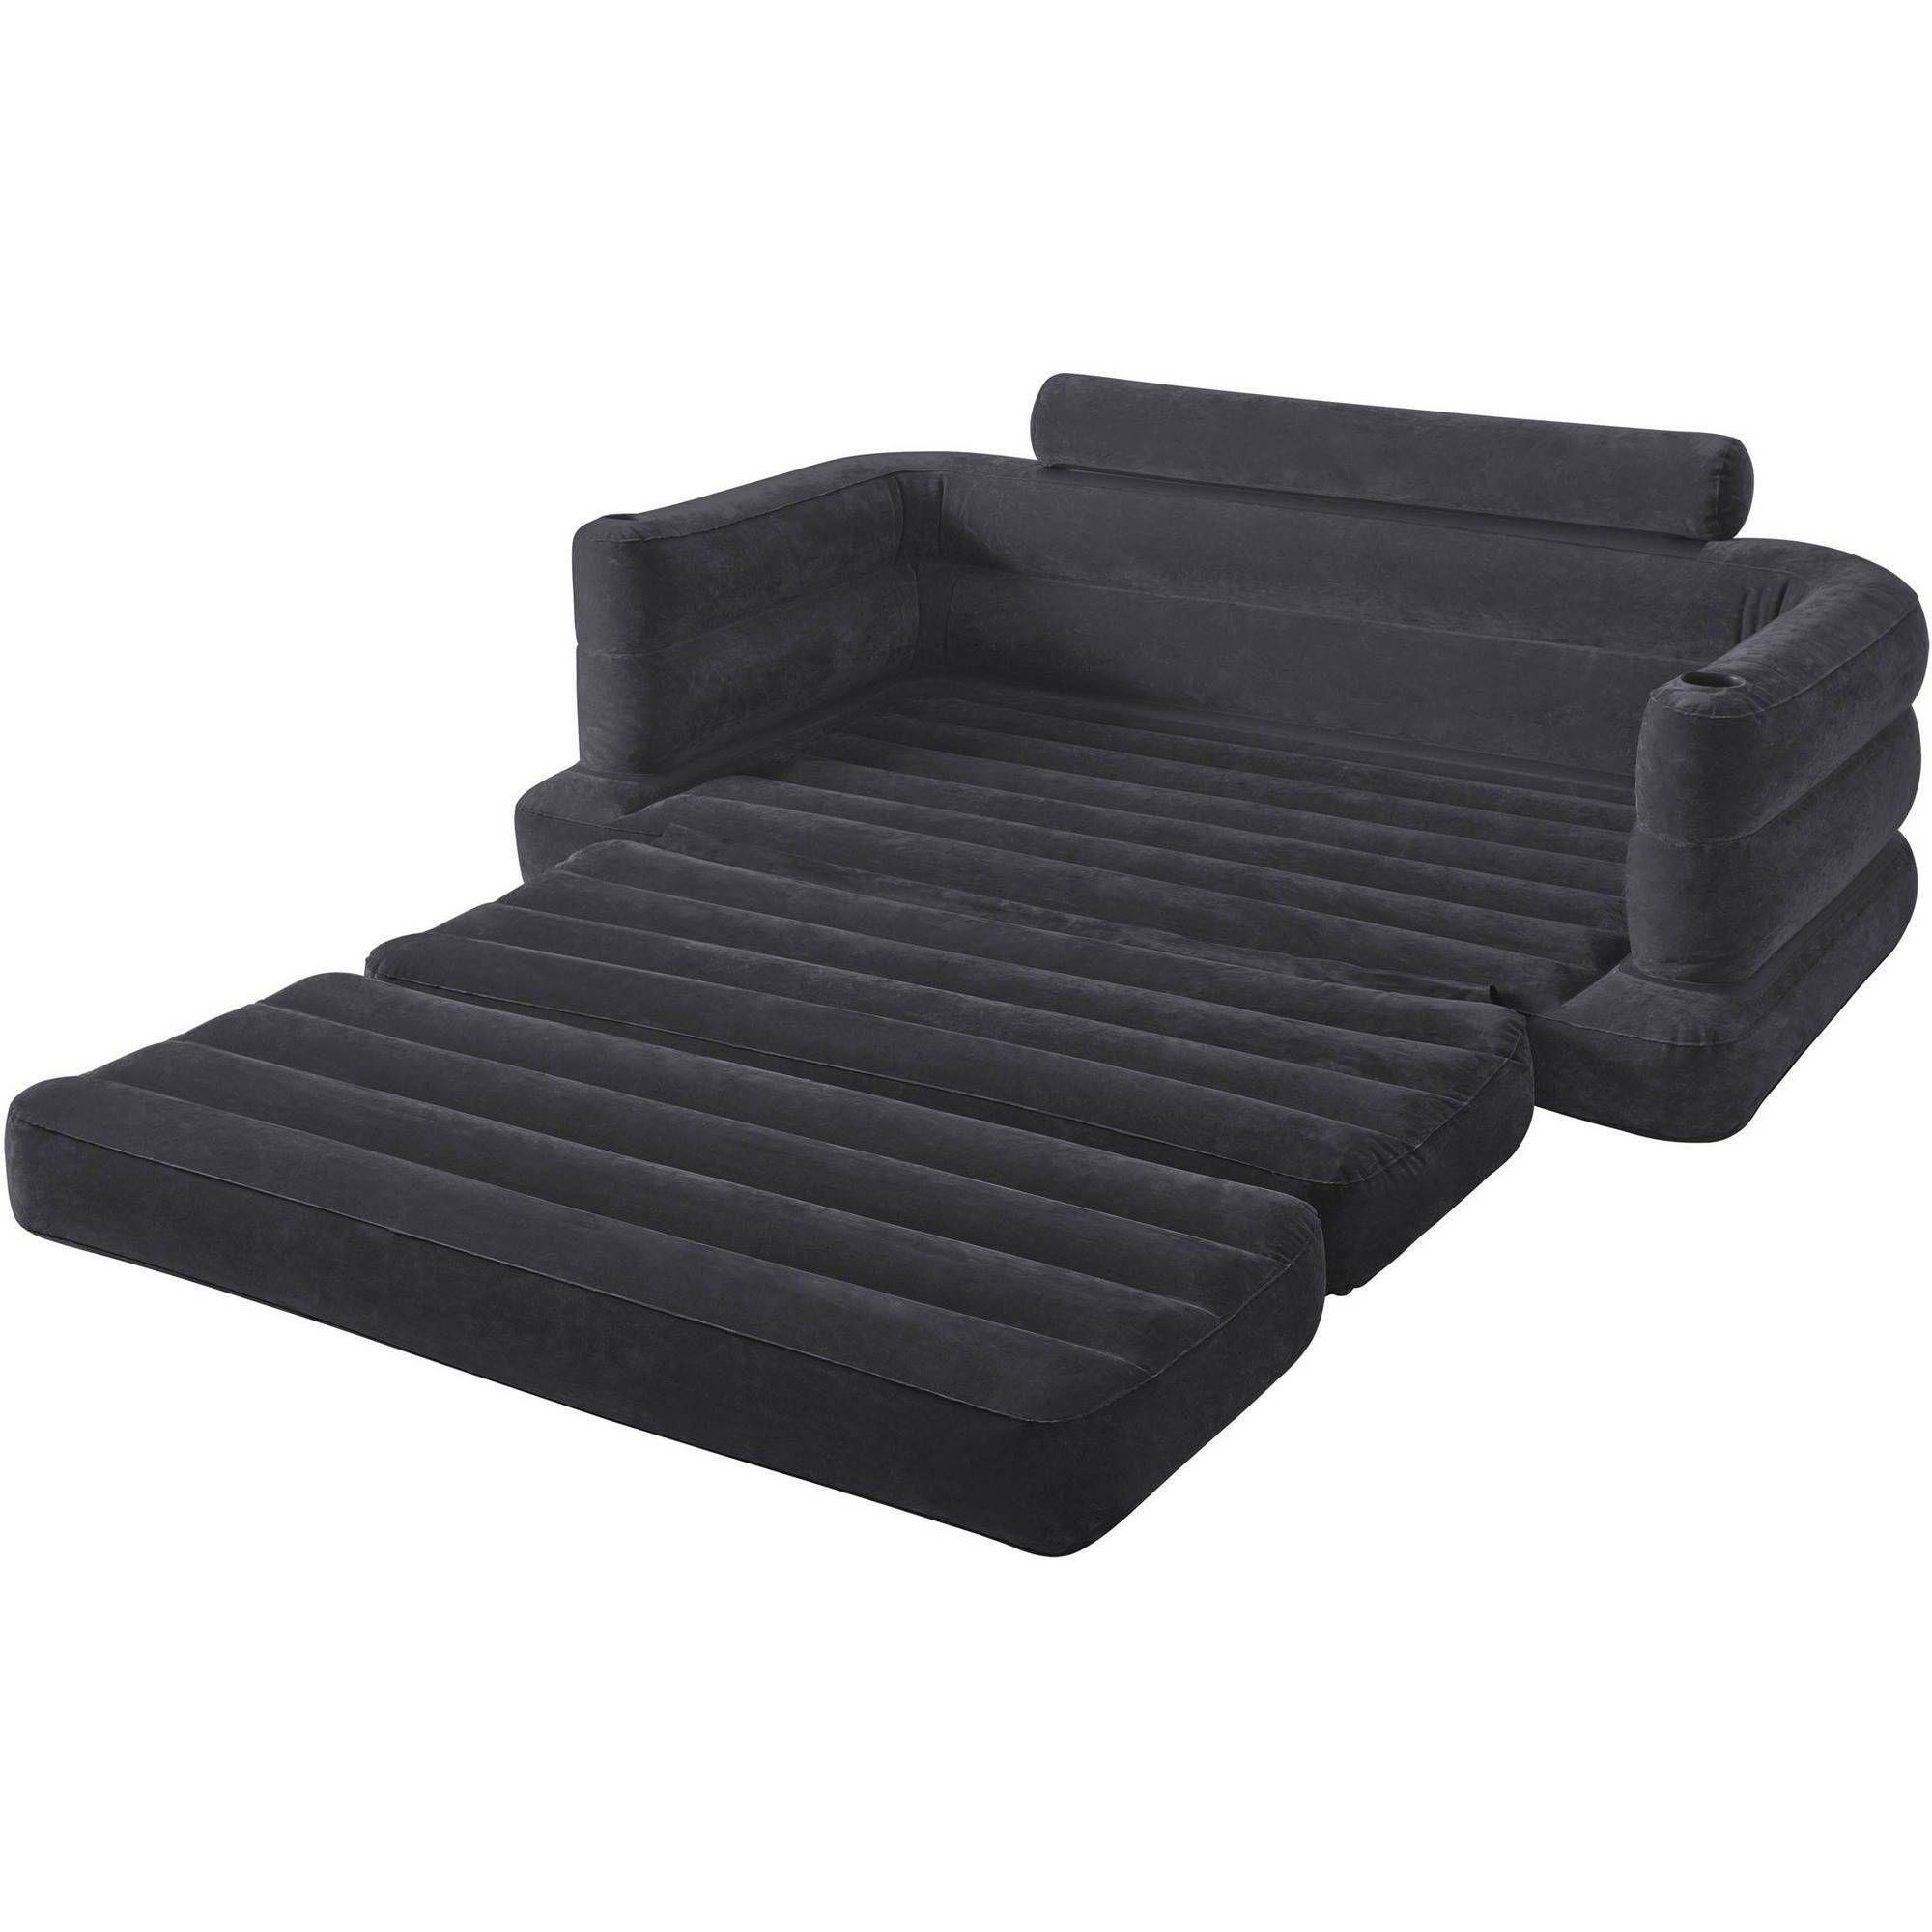 Intex Pull Out Sofa Queen 44 With Intex Pull Out Sofa Queen For Intex Inflatable Pull Out Sofas (View 15 of 15)